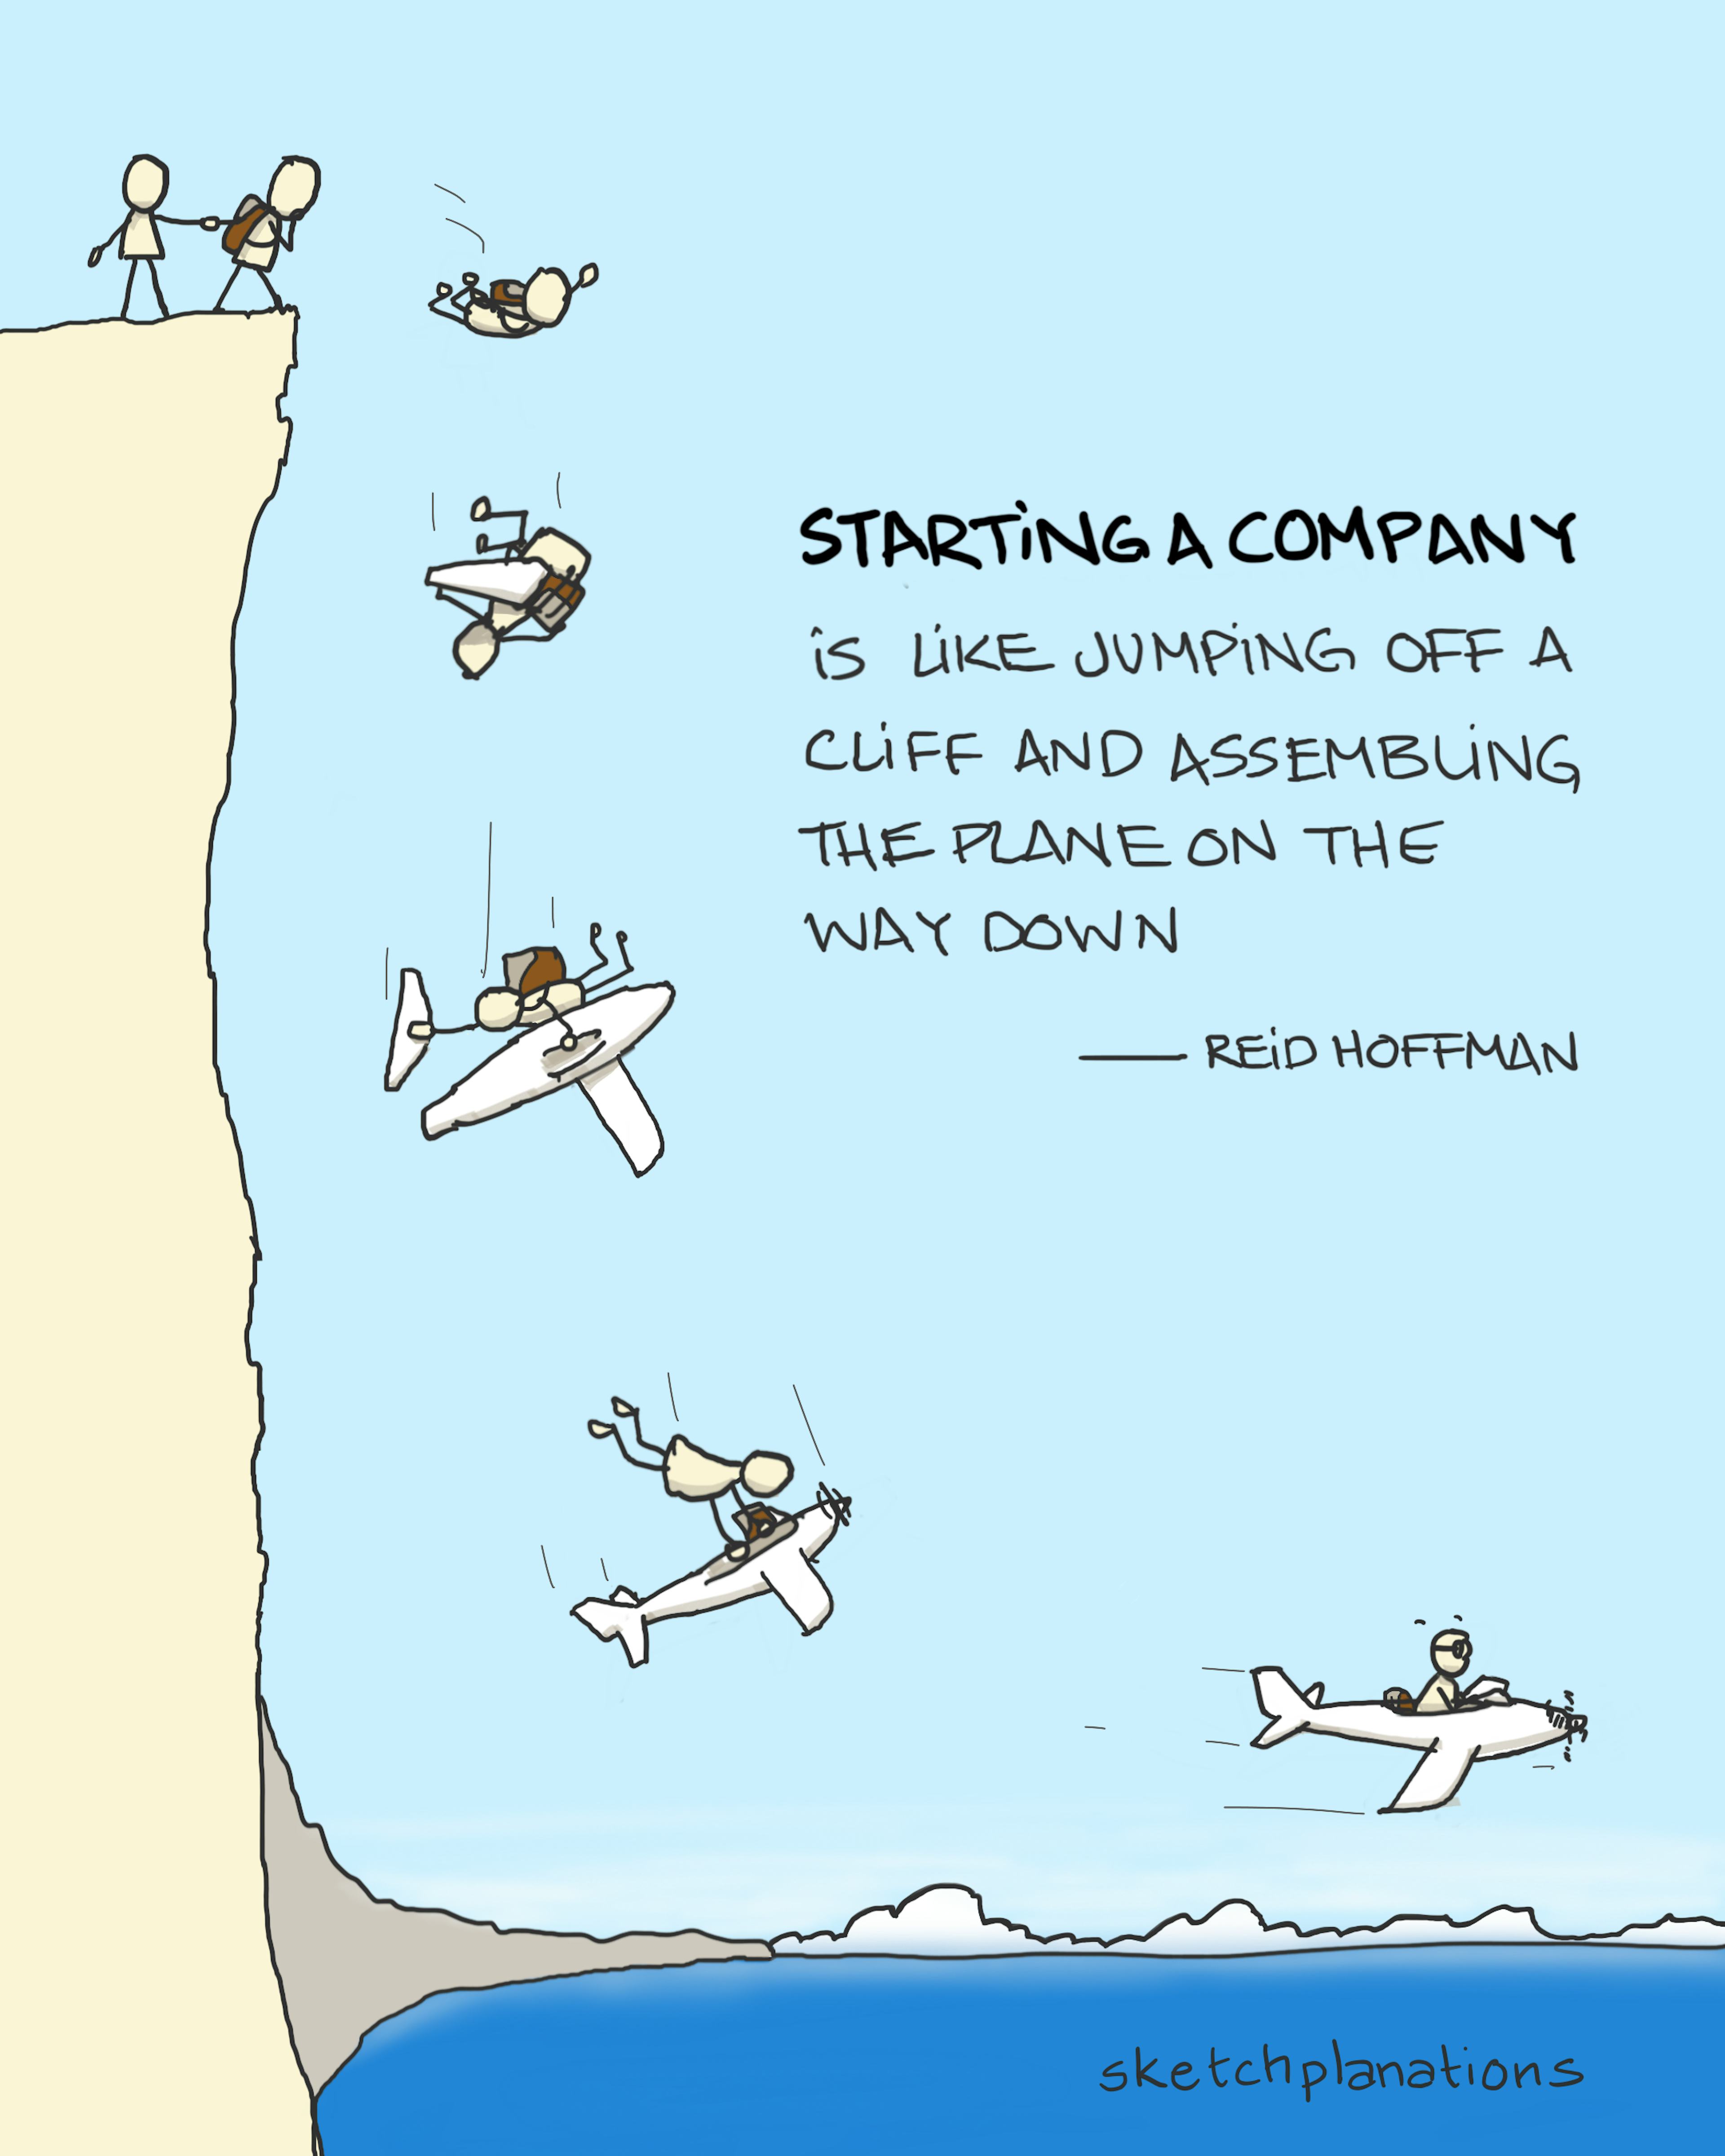 Starting a Company - Reid Hoffman quote illustration: a brave soul leaps off a tall coastal cliff with only a backpack for survival. On their way down, they quickly assemble a plane from the components in the backpack and pilot it away from the beckoning sea - just in time! Written in the sky is the quote: "Starting a Company is like jumping off a cliff and assembling a plane on the way down."